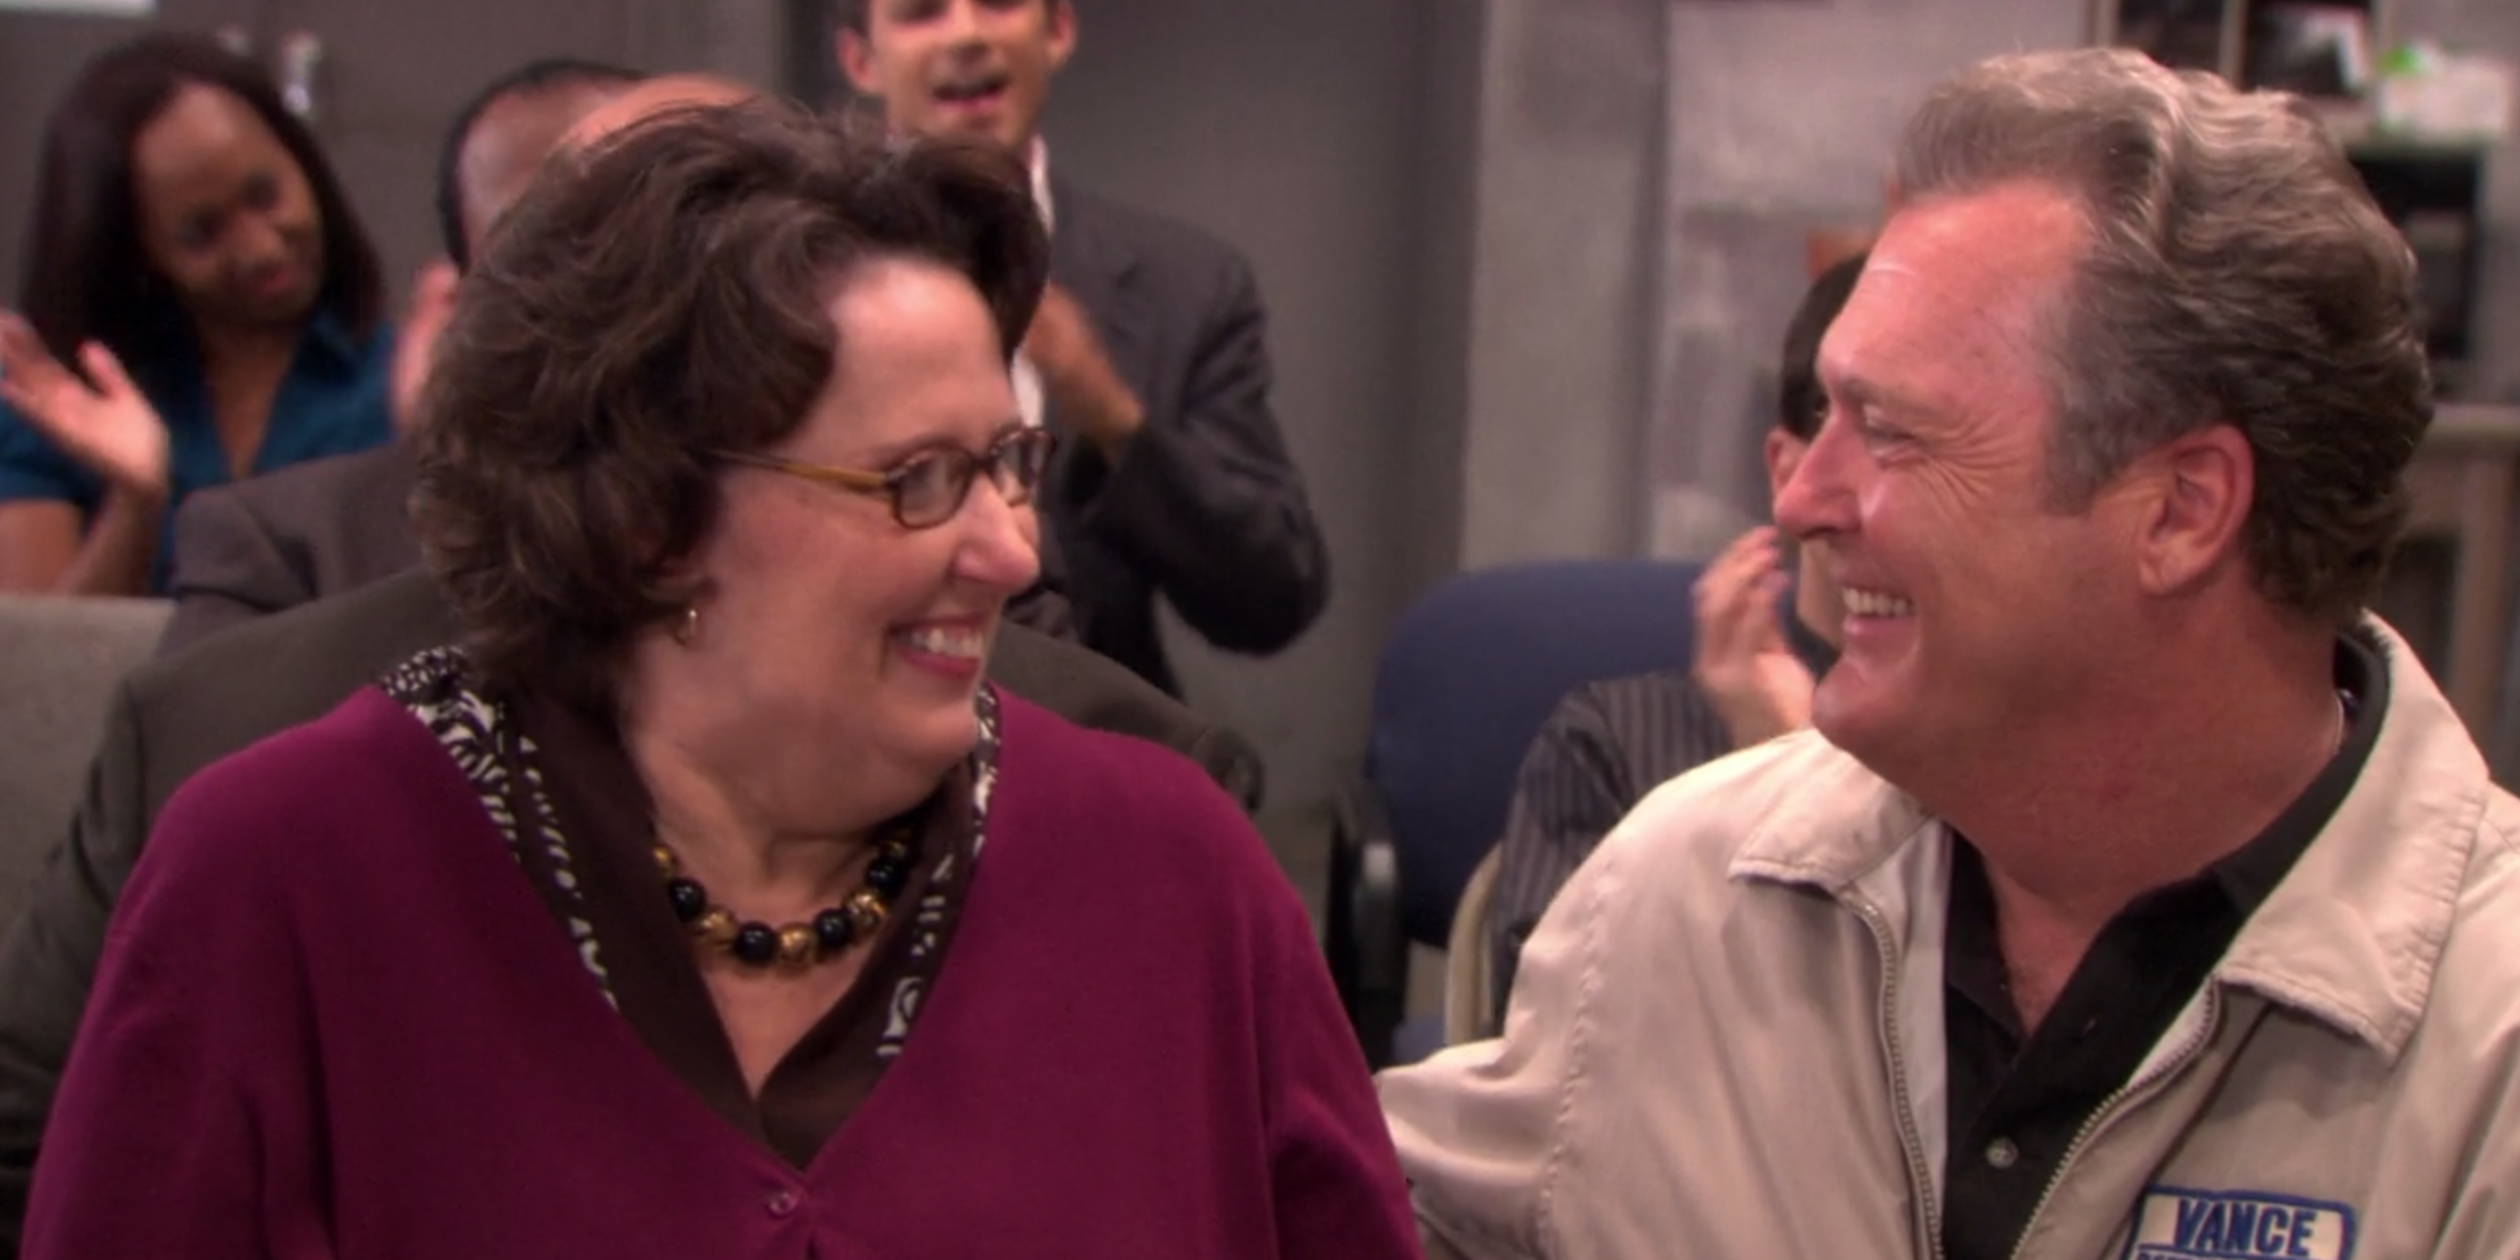 Phyllis and Bob smiling at each other in The Office